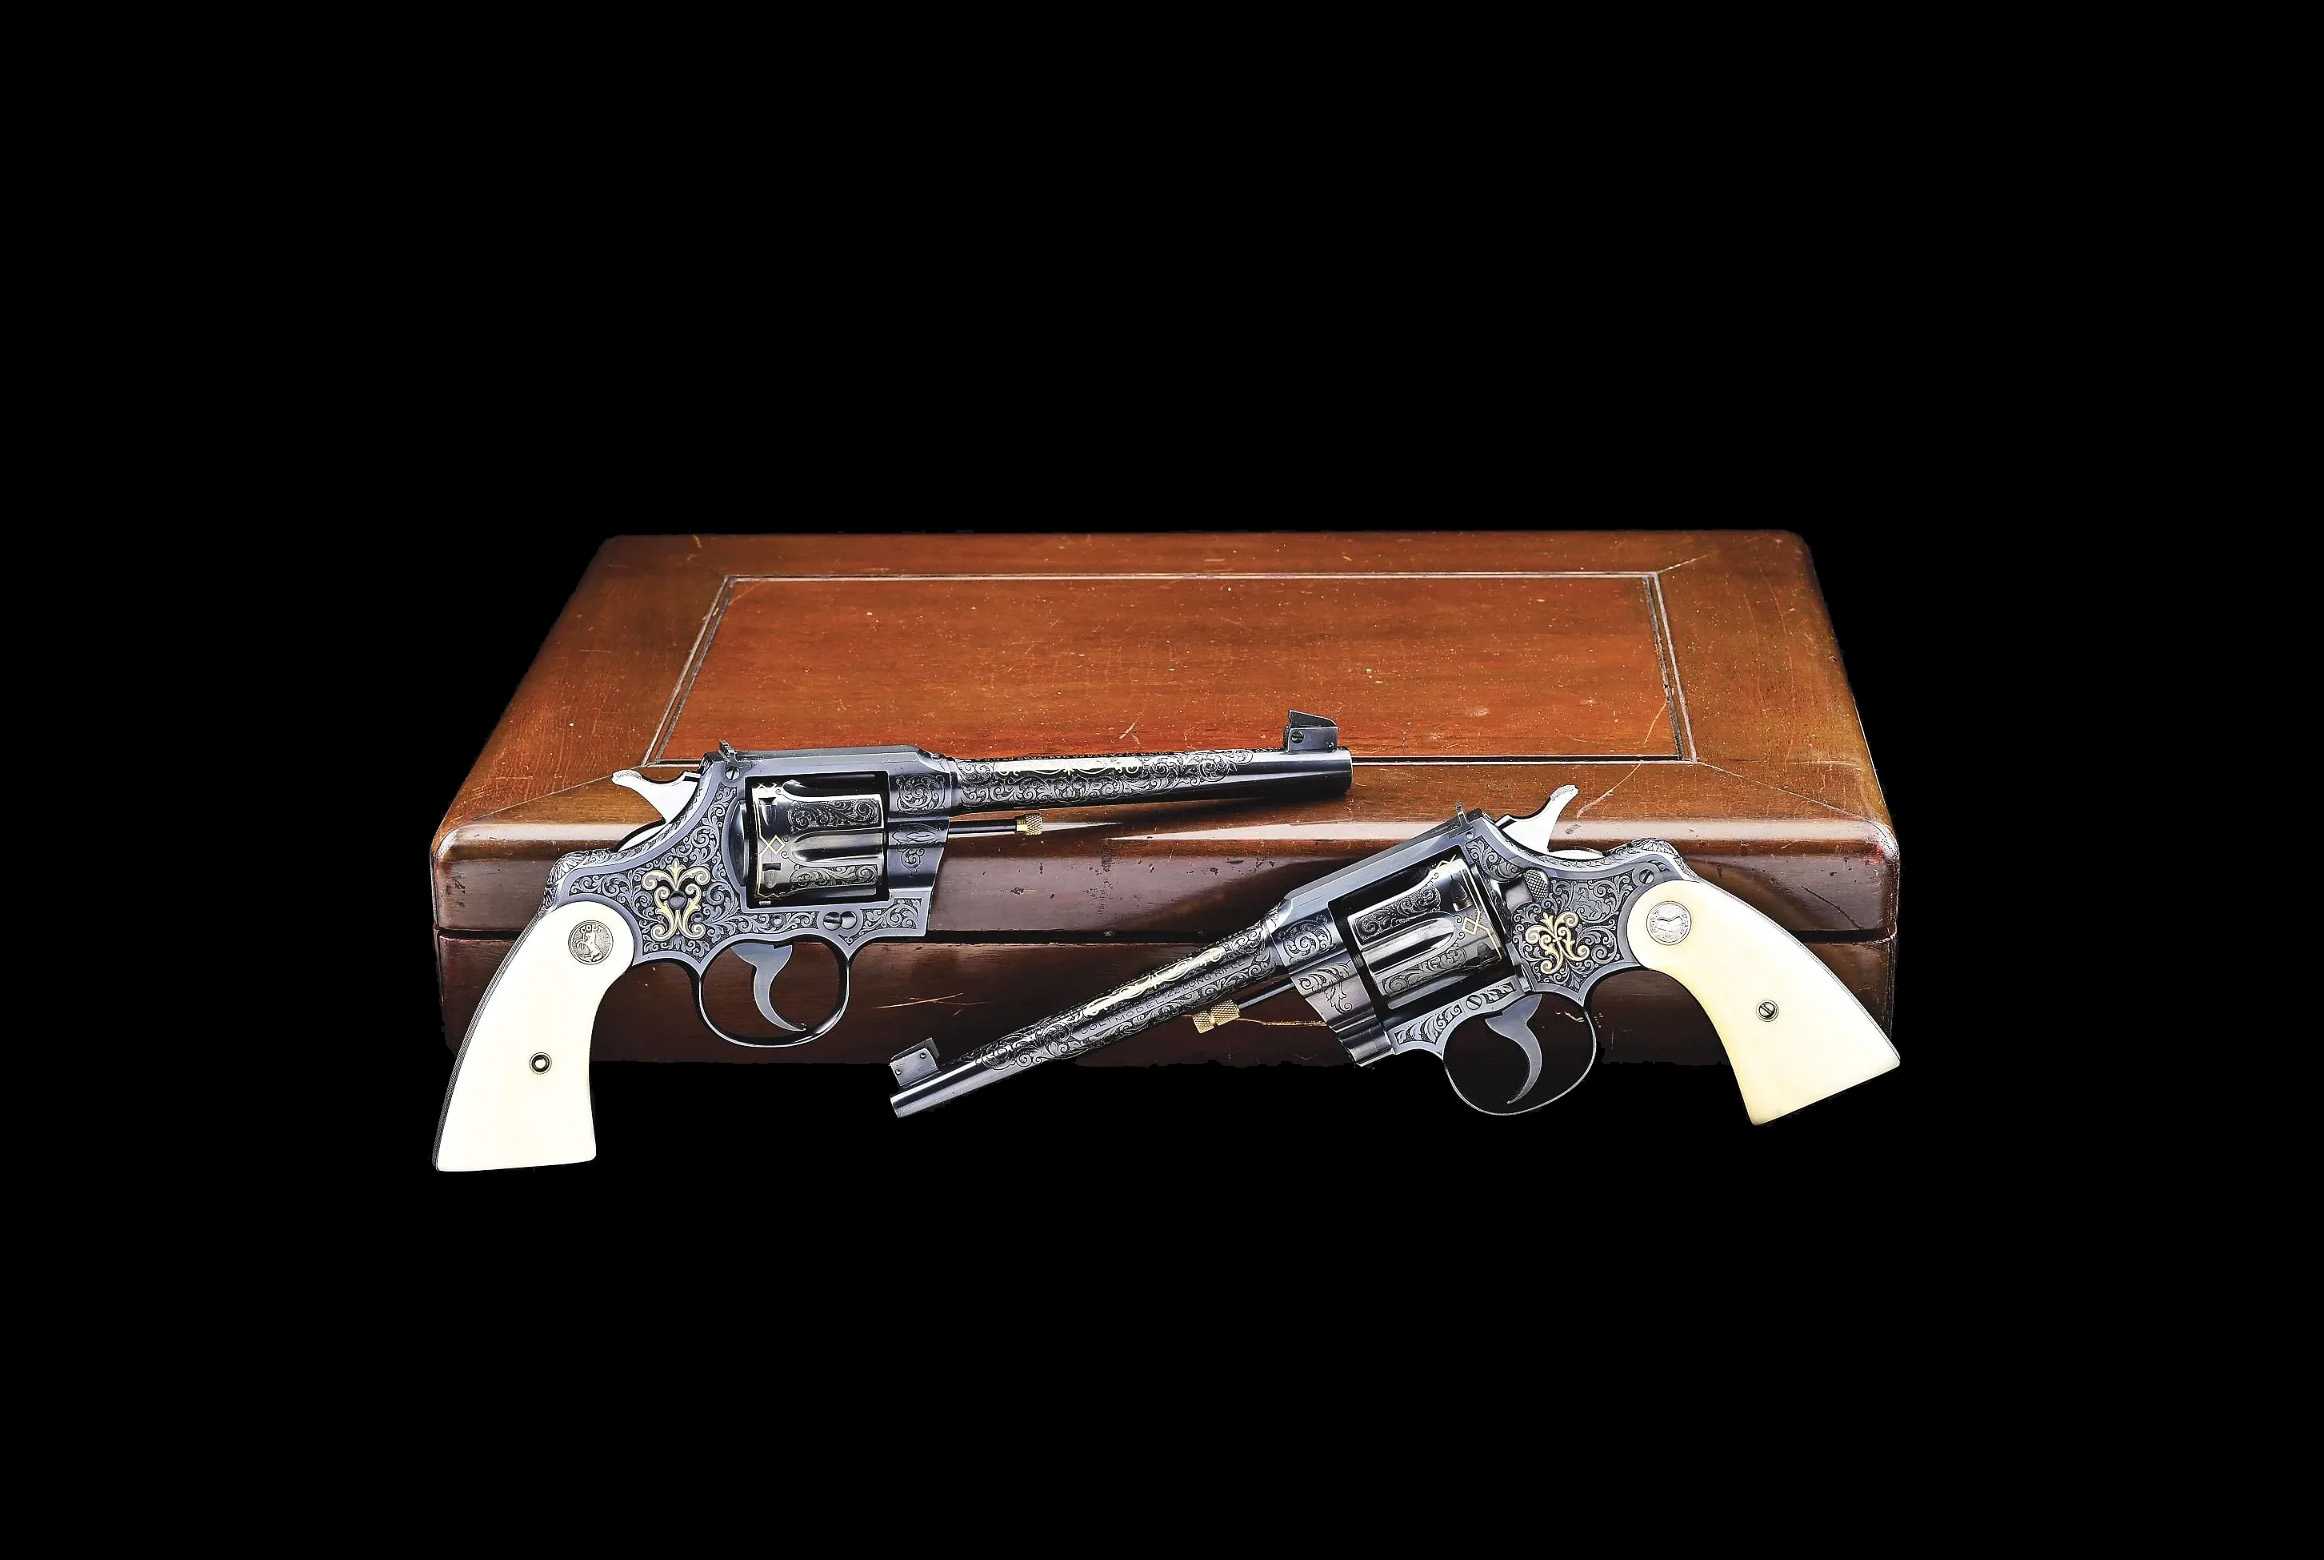 Exhibition Engraved & Gold Inlaid Colt Officers Model Double Action Revolvers, estimated at $75,000-$150,000 at Morphy.